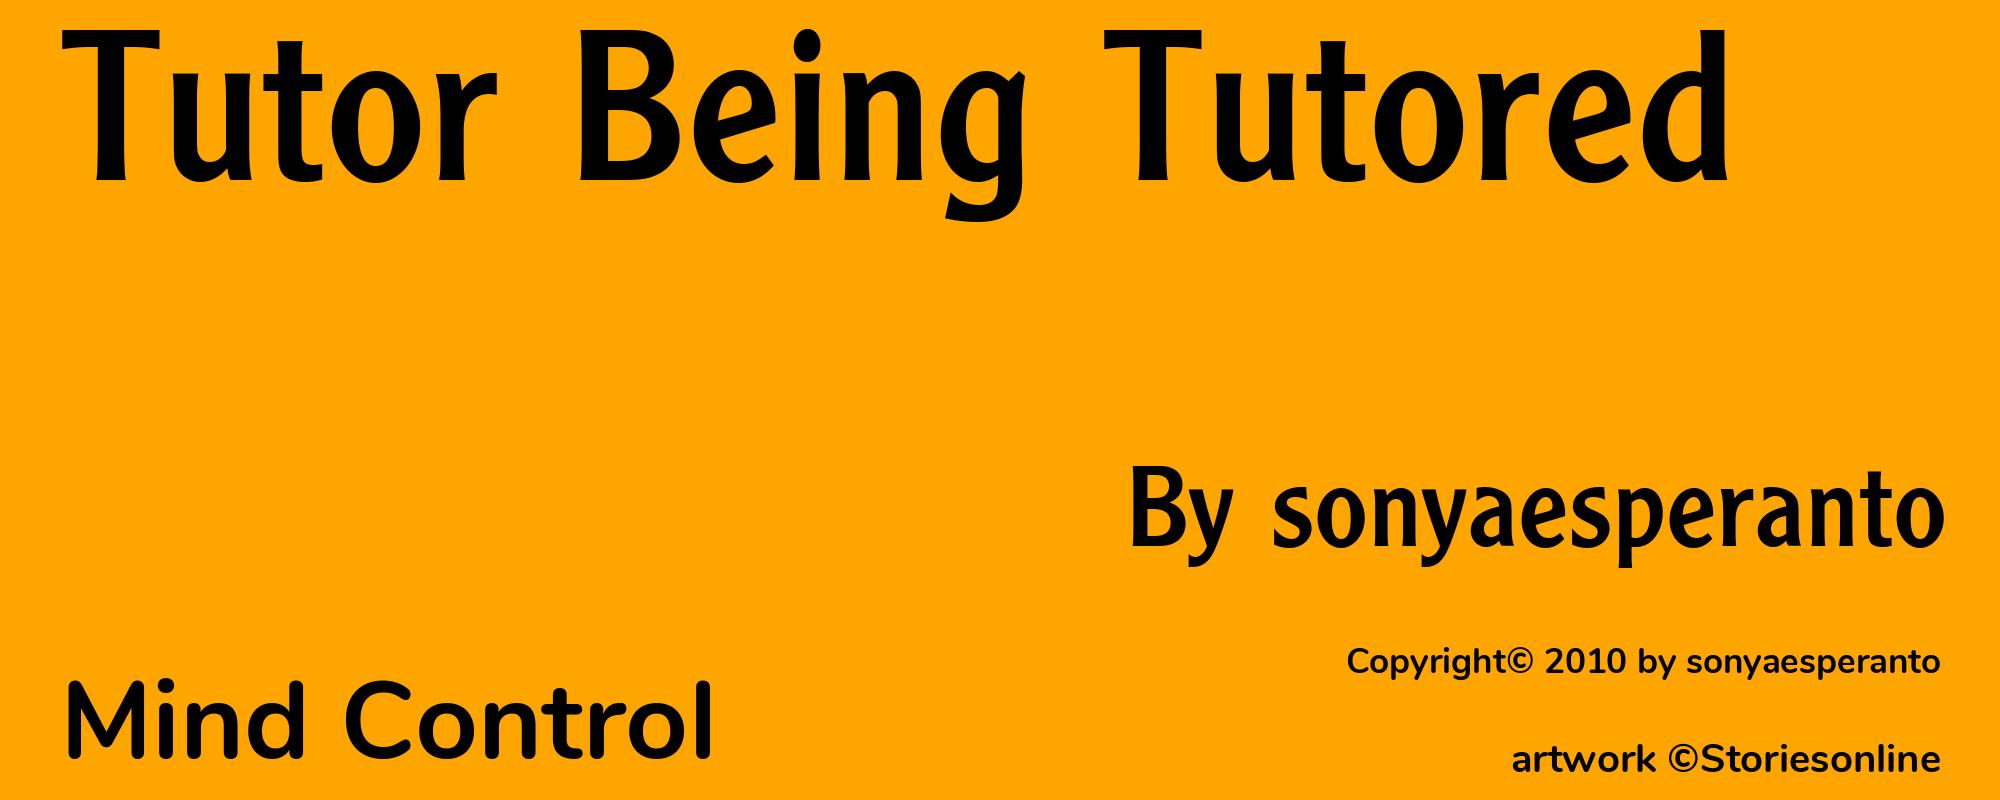 Tutor Being Tutored - Cover